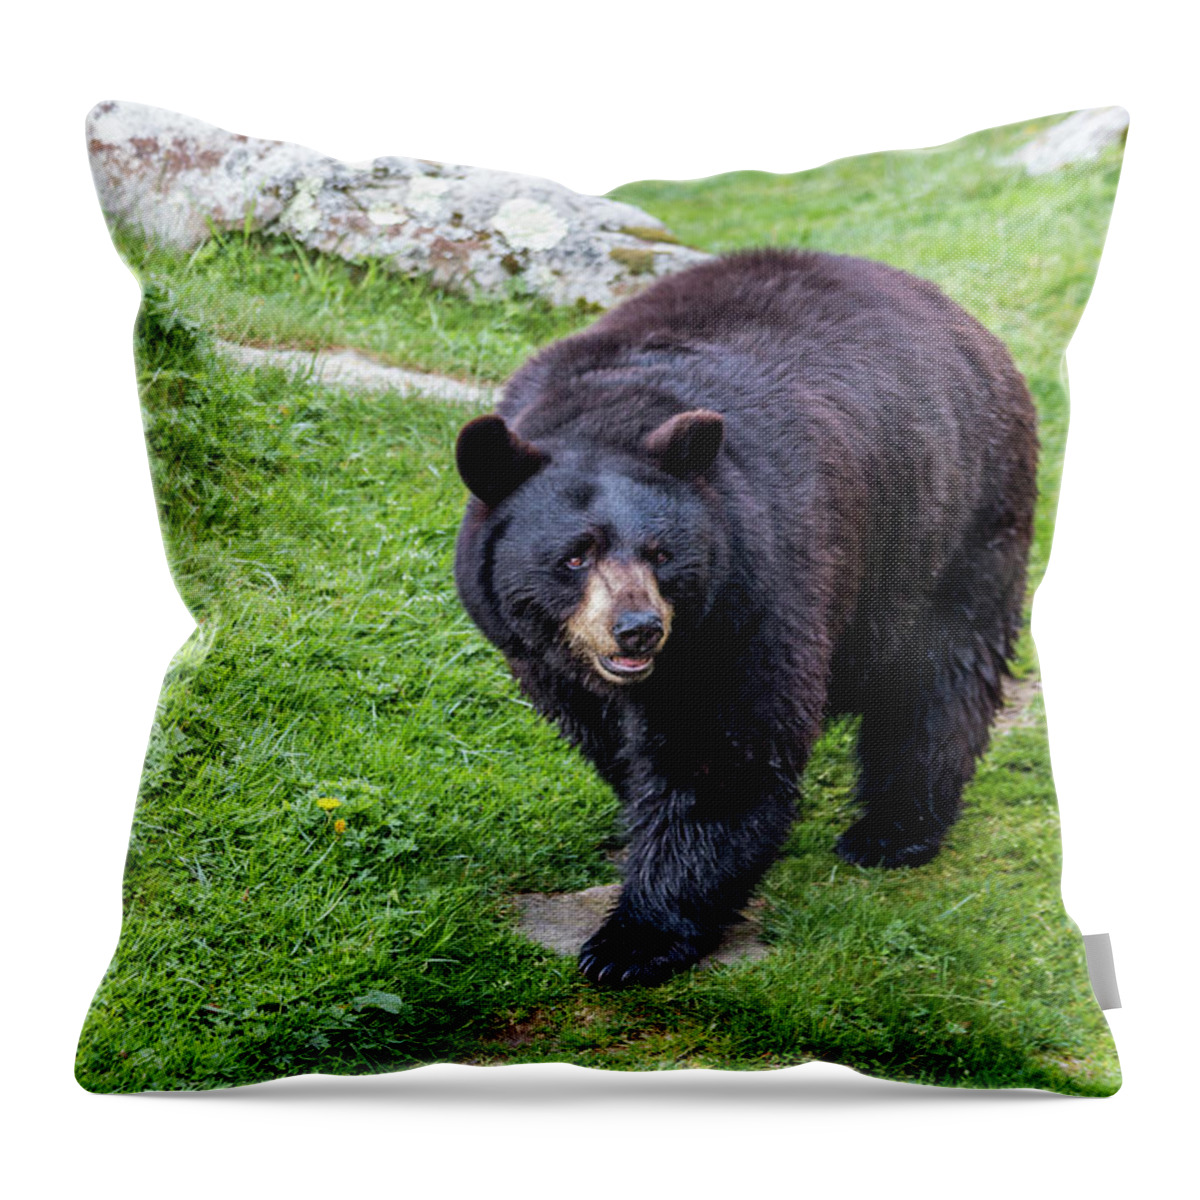 Bear Throw Pillow featuring the photograph Black Bear by Susie Weaver